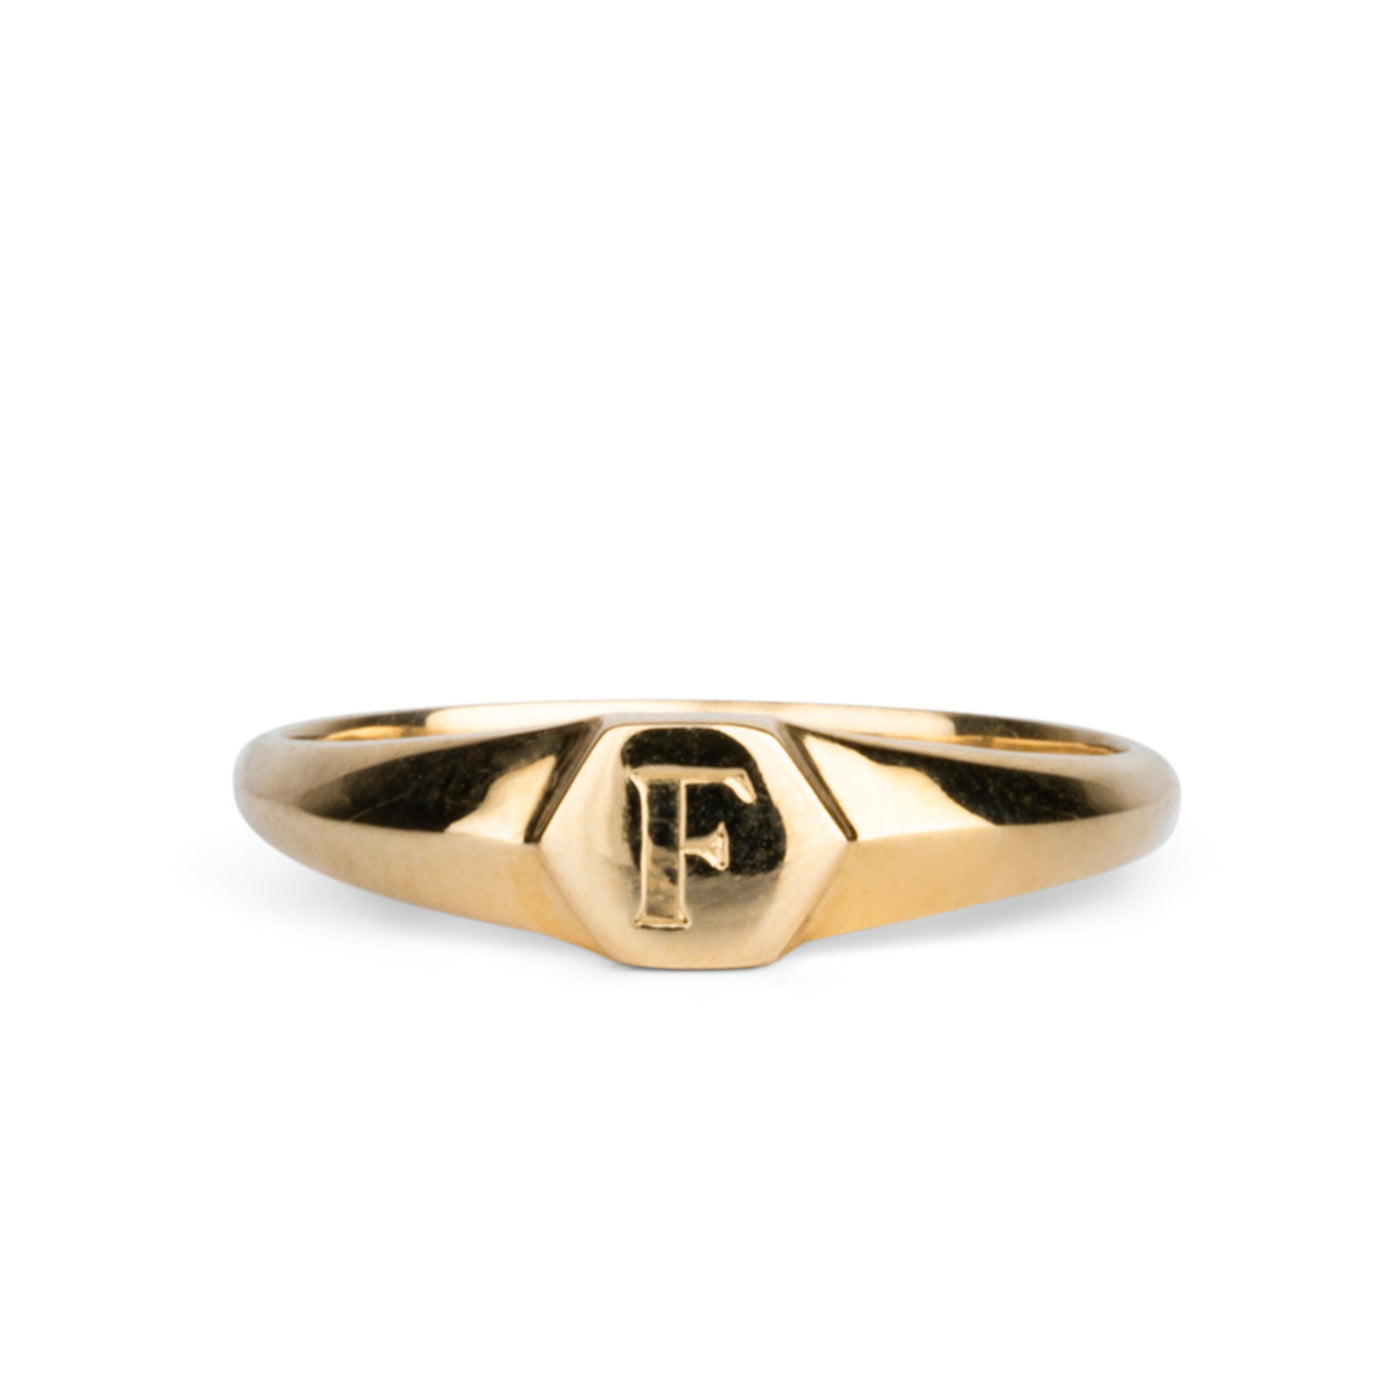 Low profile gold signet ring with hexagon top and engraved single block "F" initial